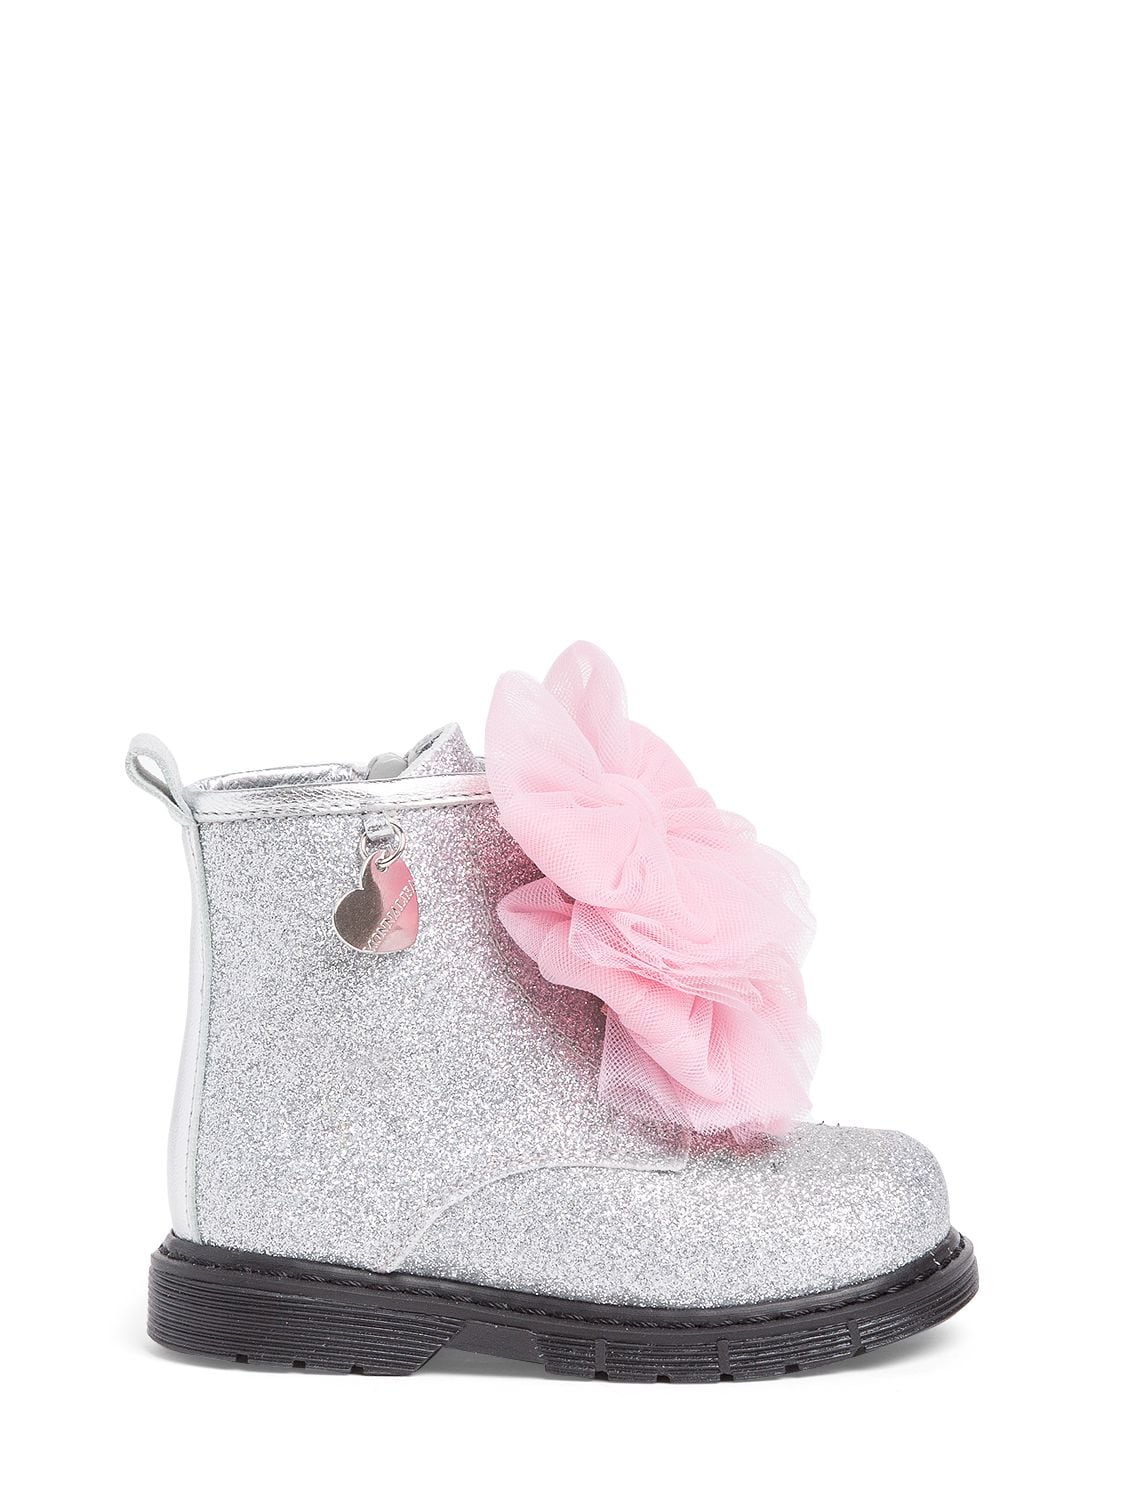 Image of Glittered Zip-up Boots W/ Tulle Bow